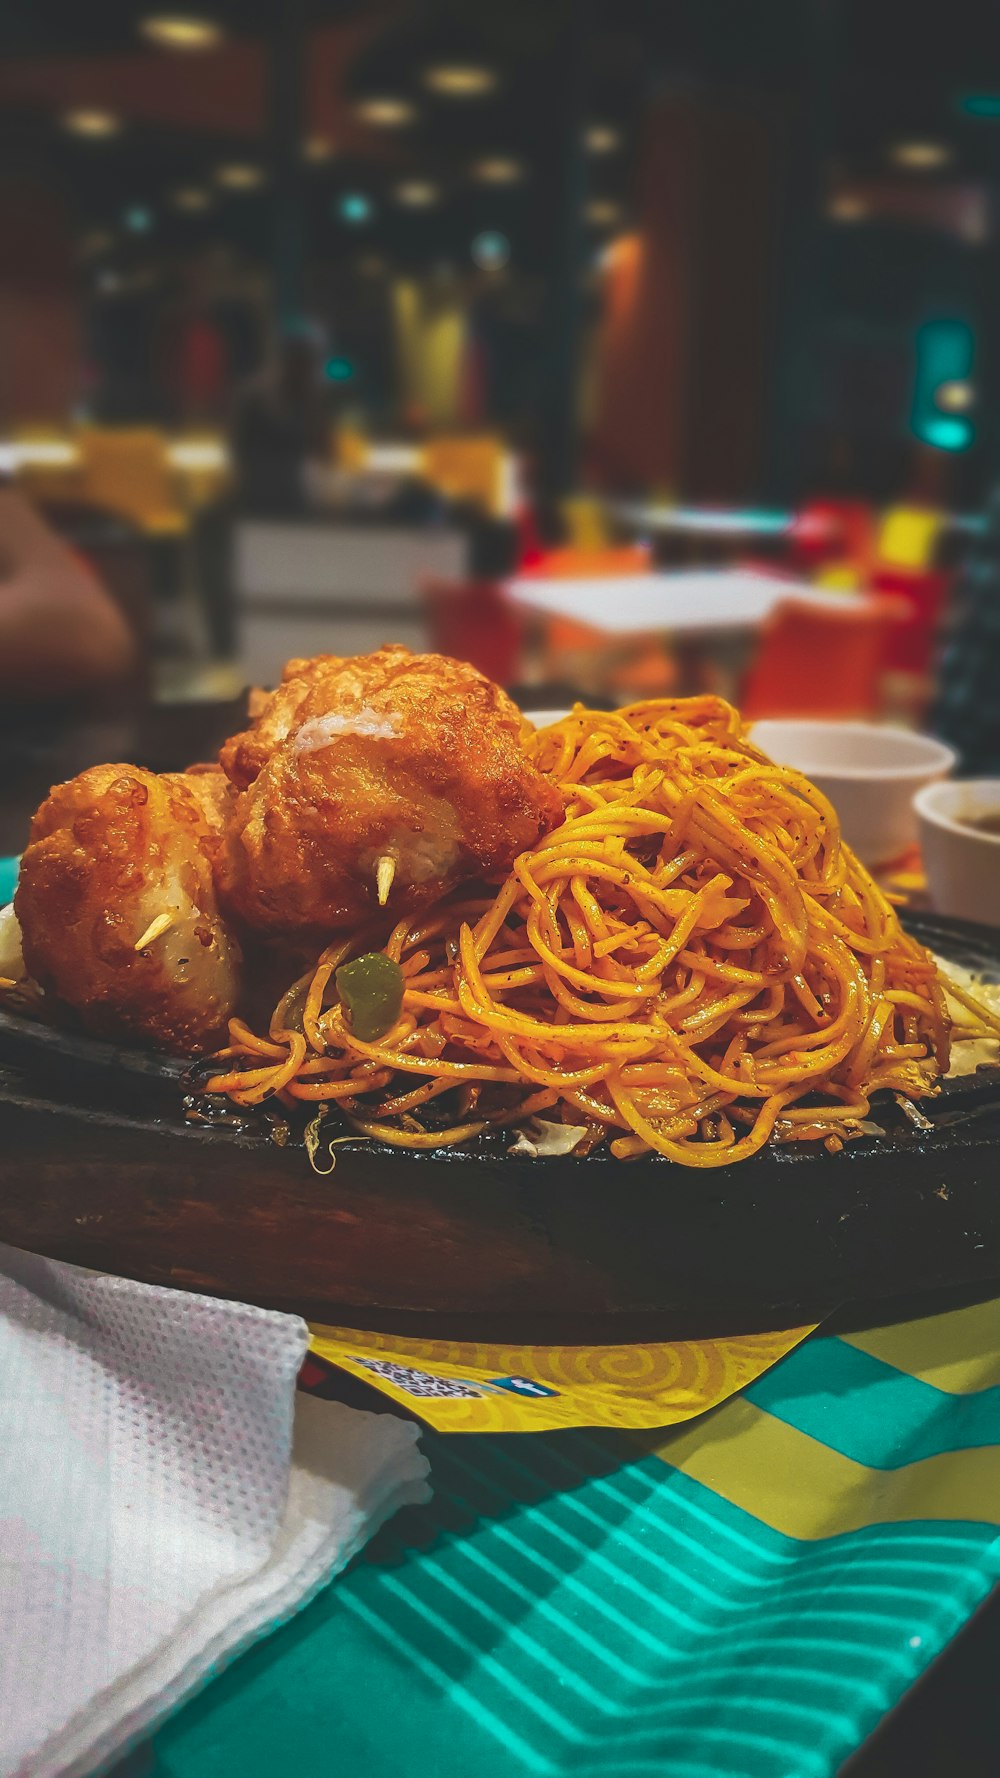 spaghetti and fried chicken platter on table